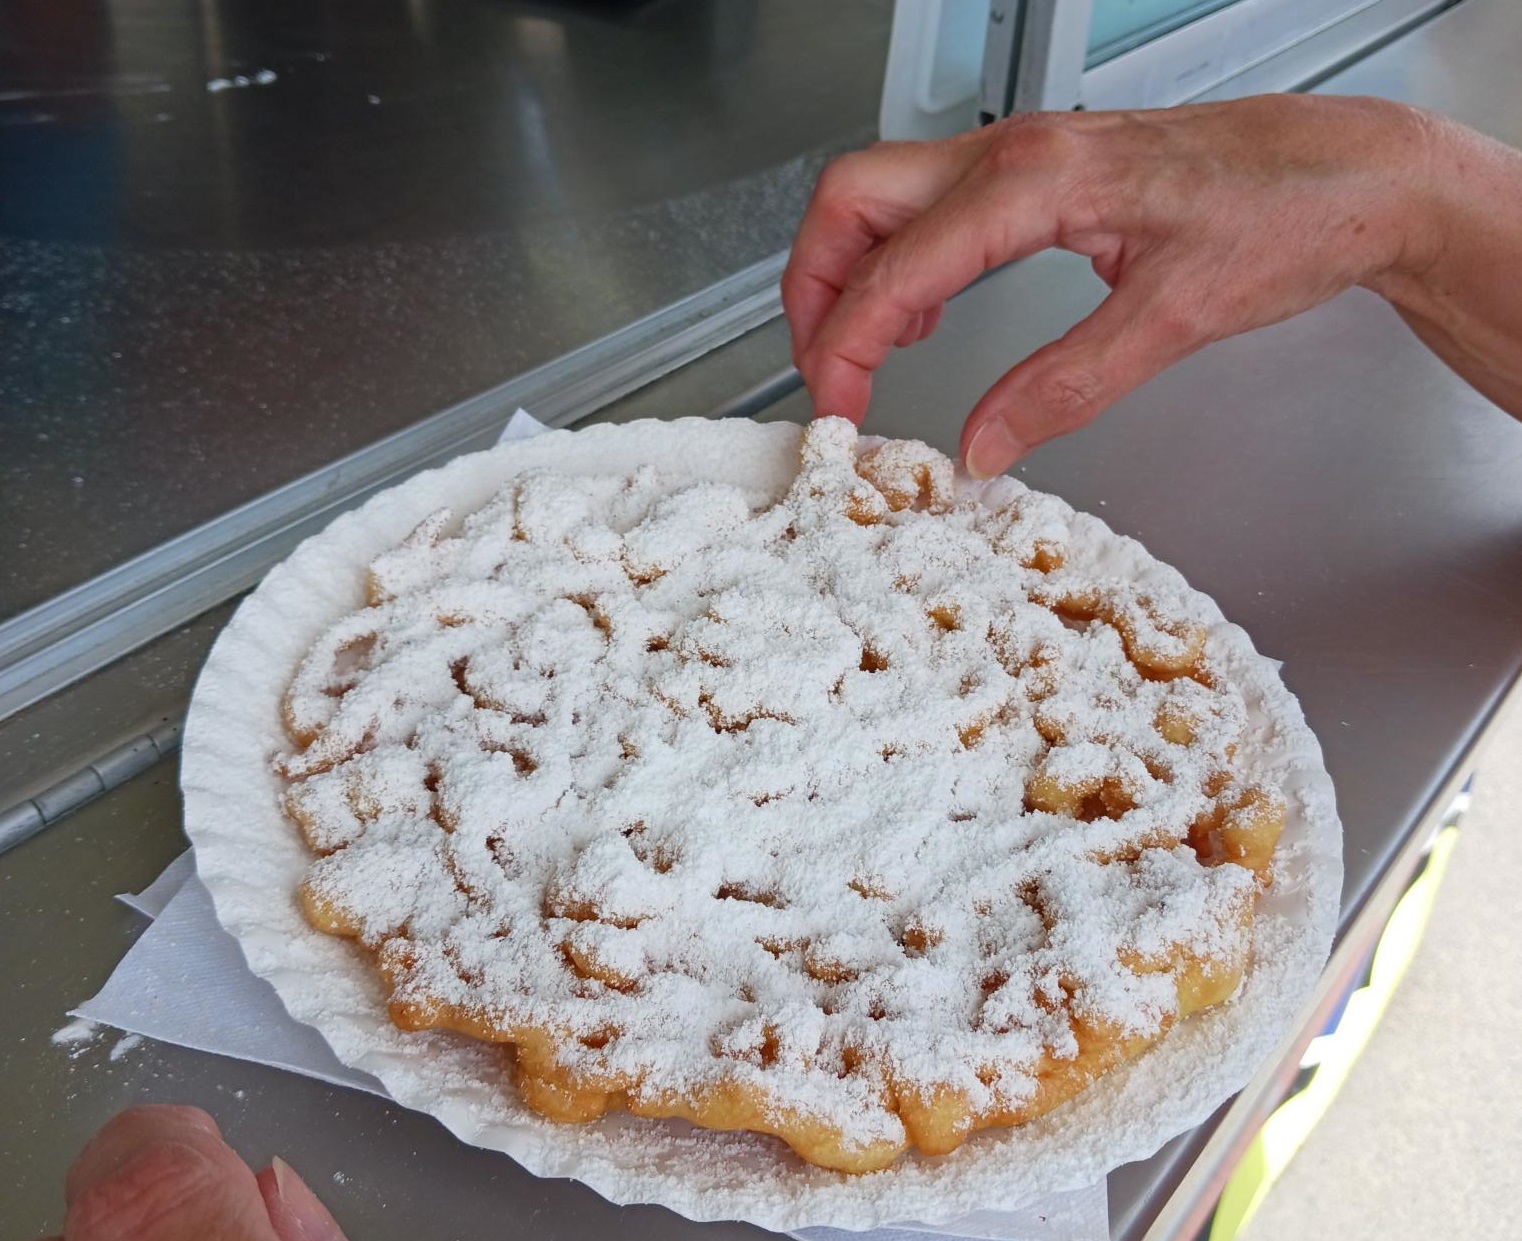 Regular funnel cake with confectioner's sugar from Reagan’s Sweet Shop.